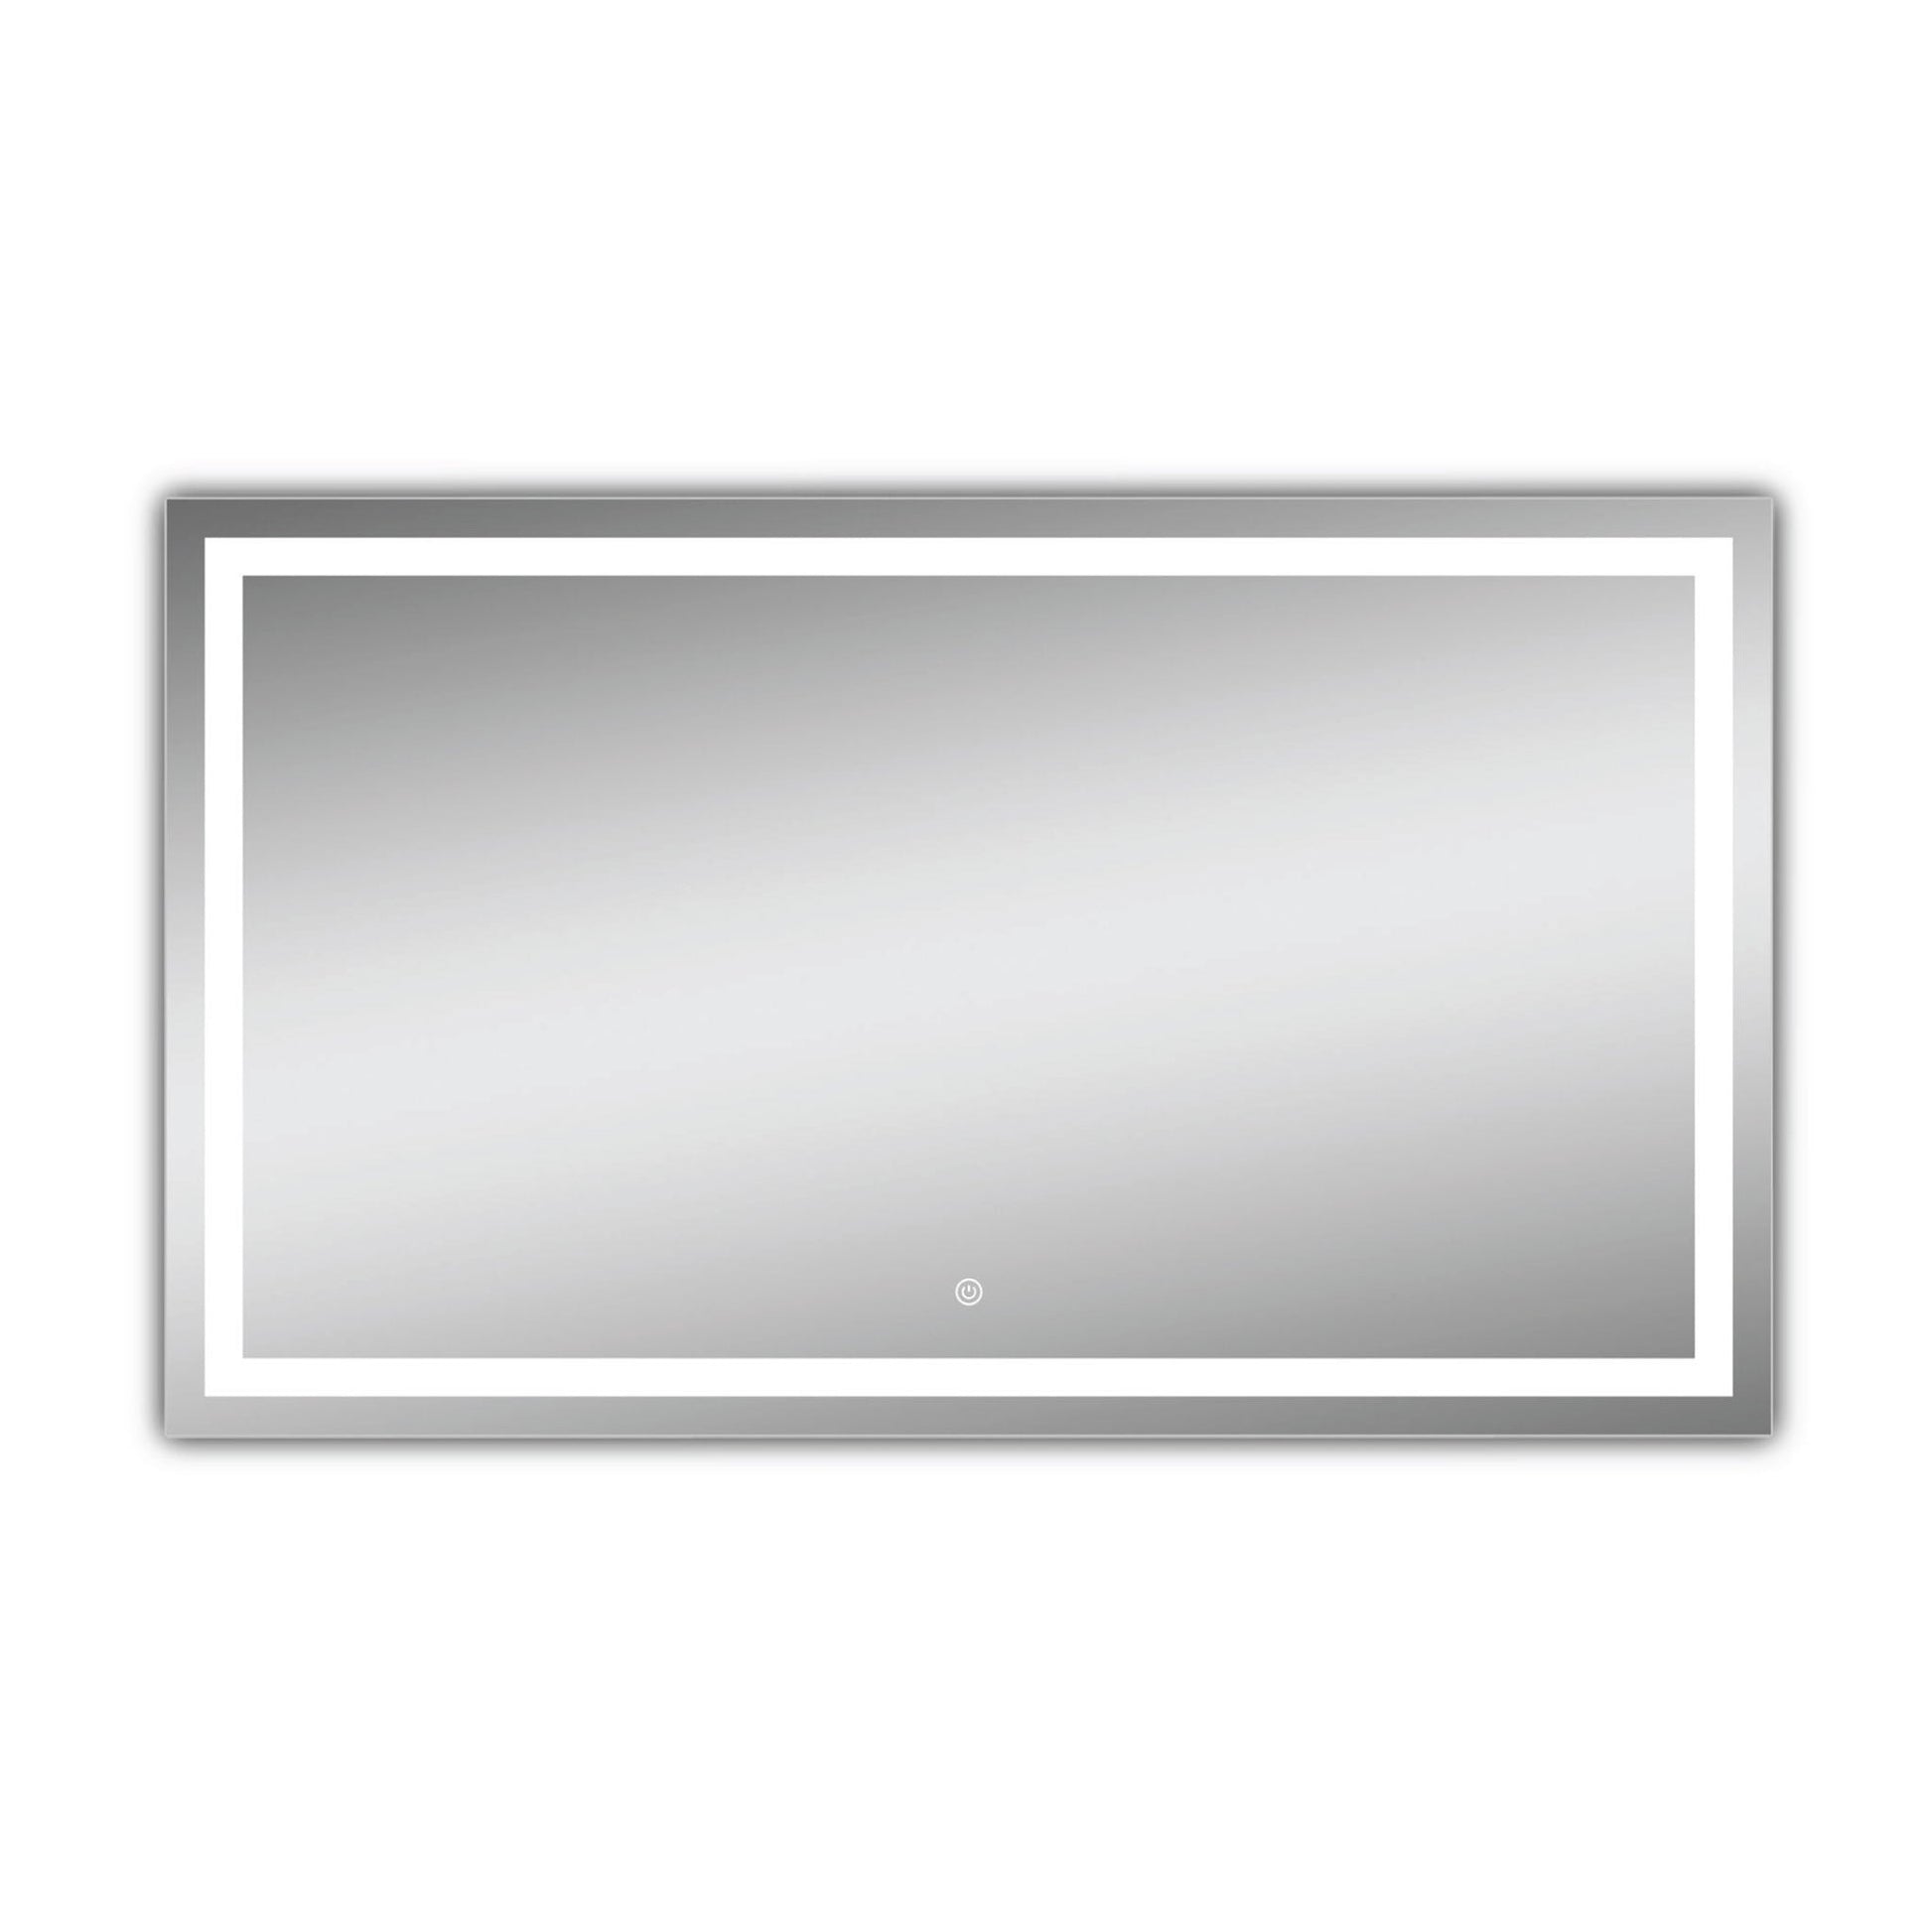 Ratel 47" x 28" Rectangular LED Mirror With Touch Sensor Switch